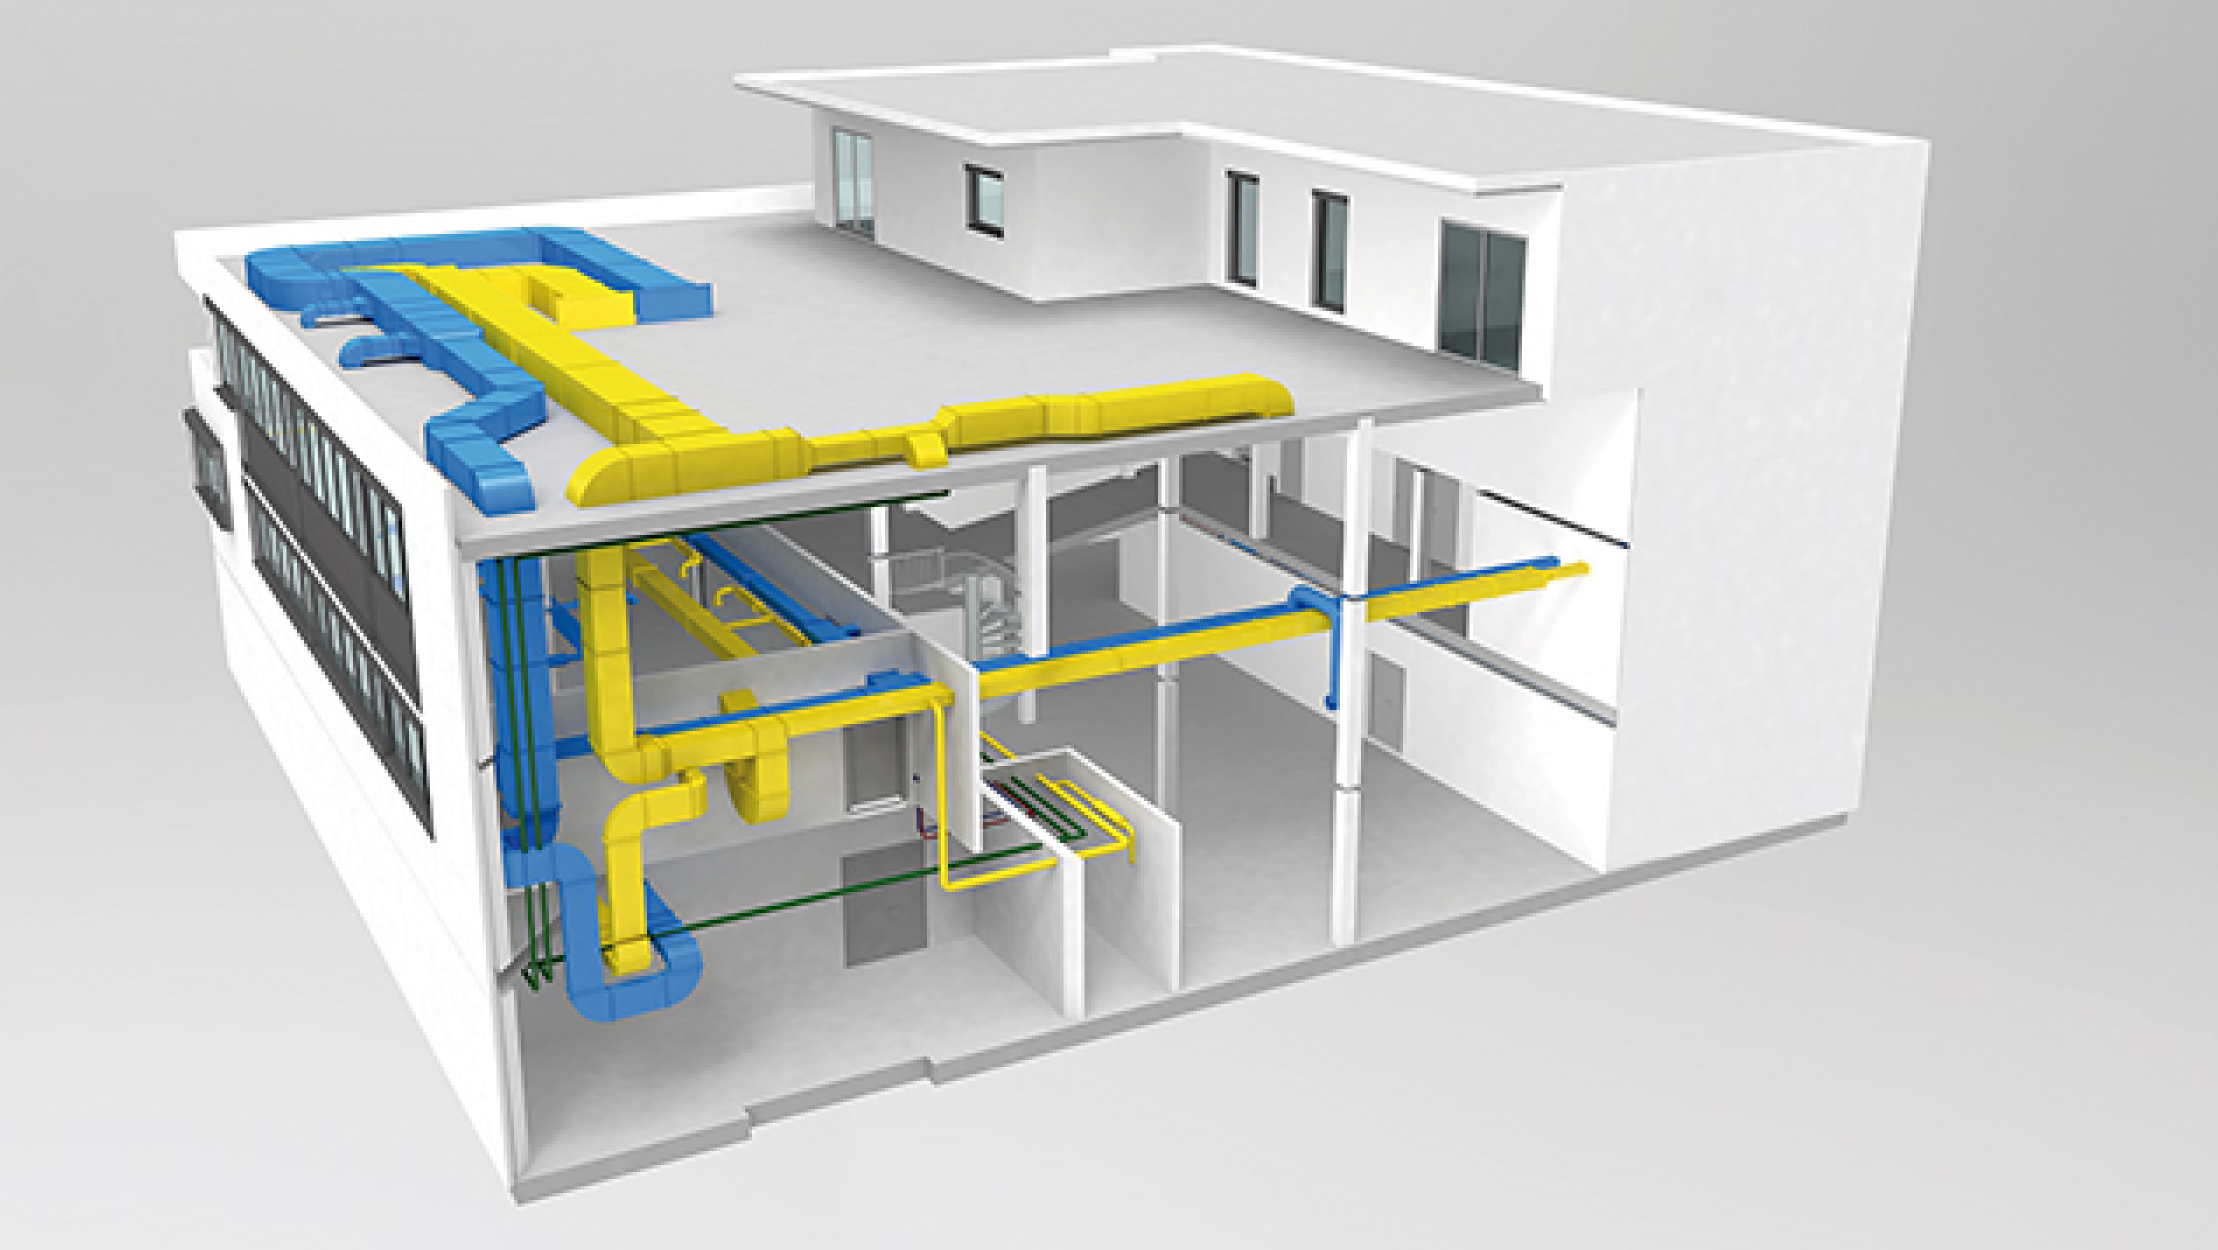 INDUSTRIAL BUILDING WITH GEOTHERMAL ENERGY